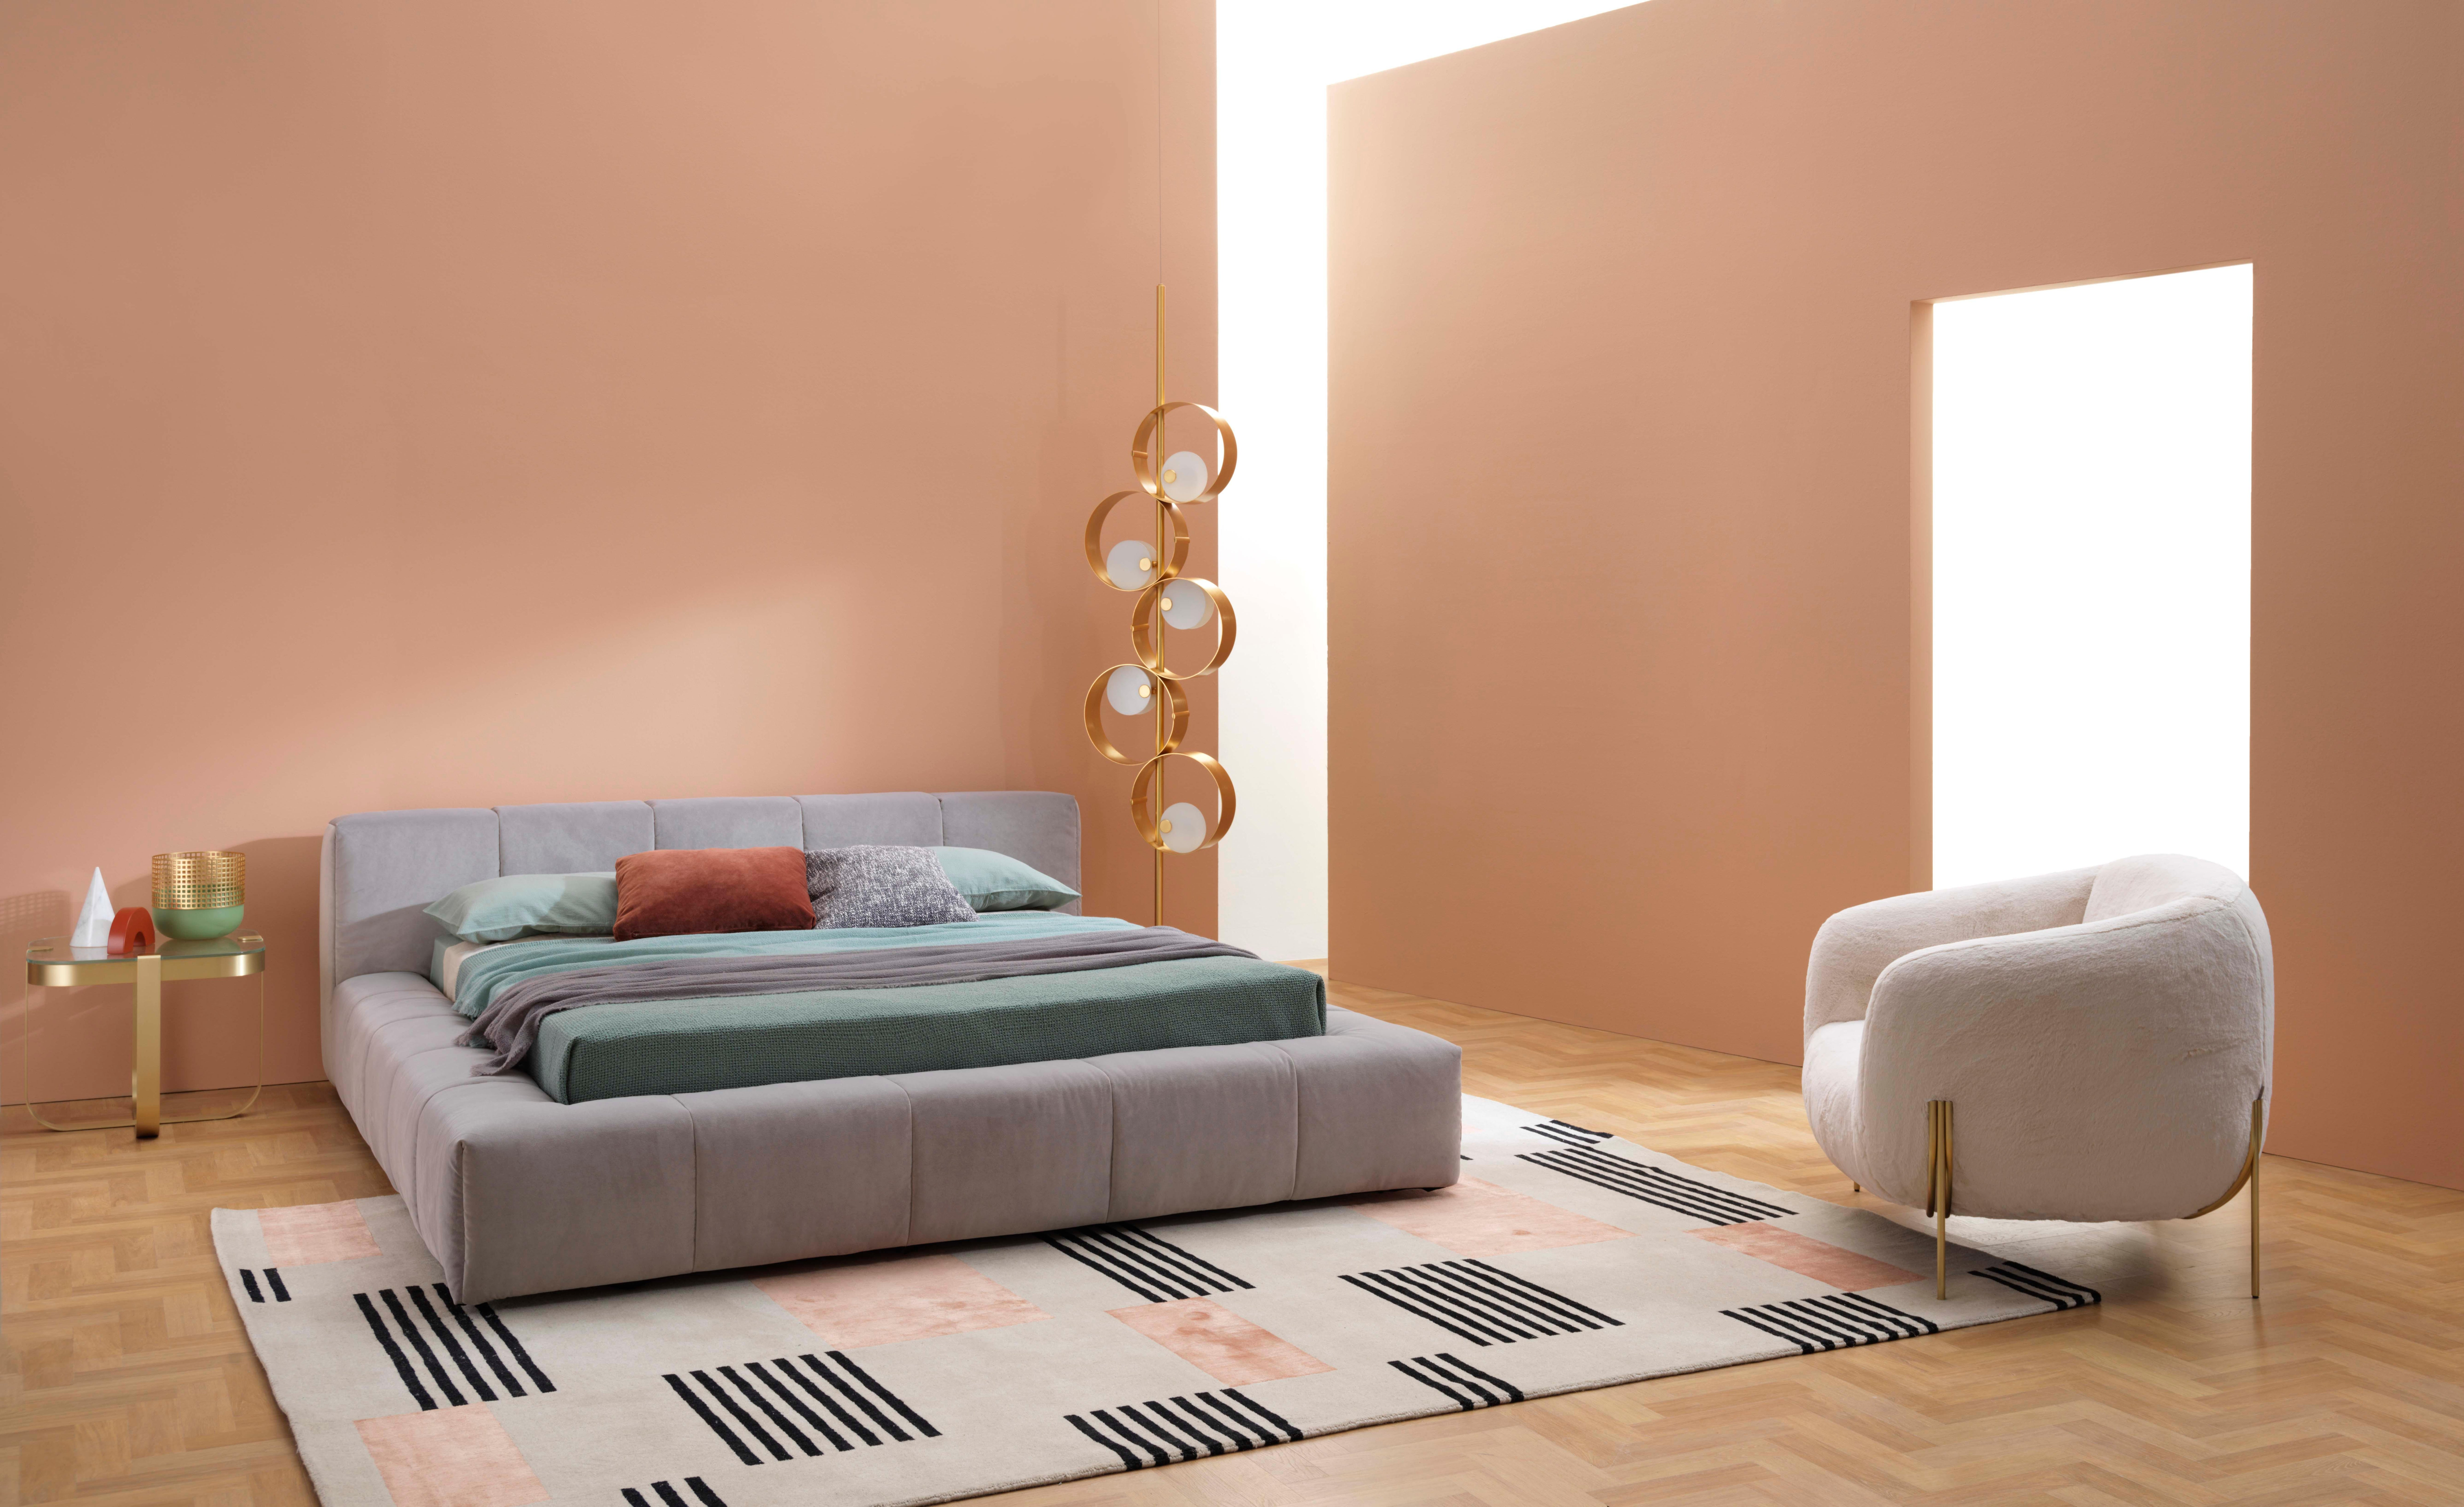 Pixel Box Large is the most voluminous option in the Pixel bed collection, completely enclosed by the soft and ample bed frame. Pixel Box Large most evidently recalls the iconic and generous rounded shapes of Saba’s Pixel sofa. With bed base,